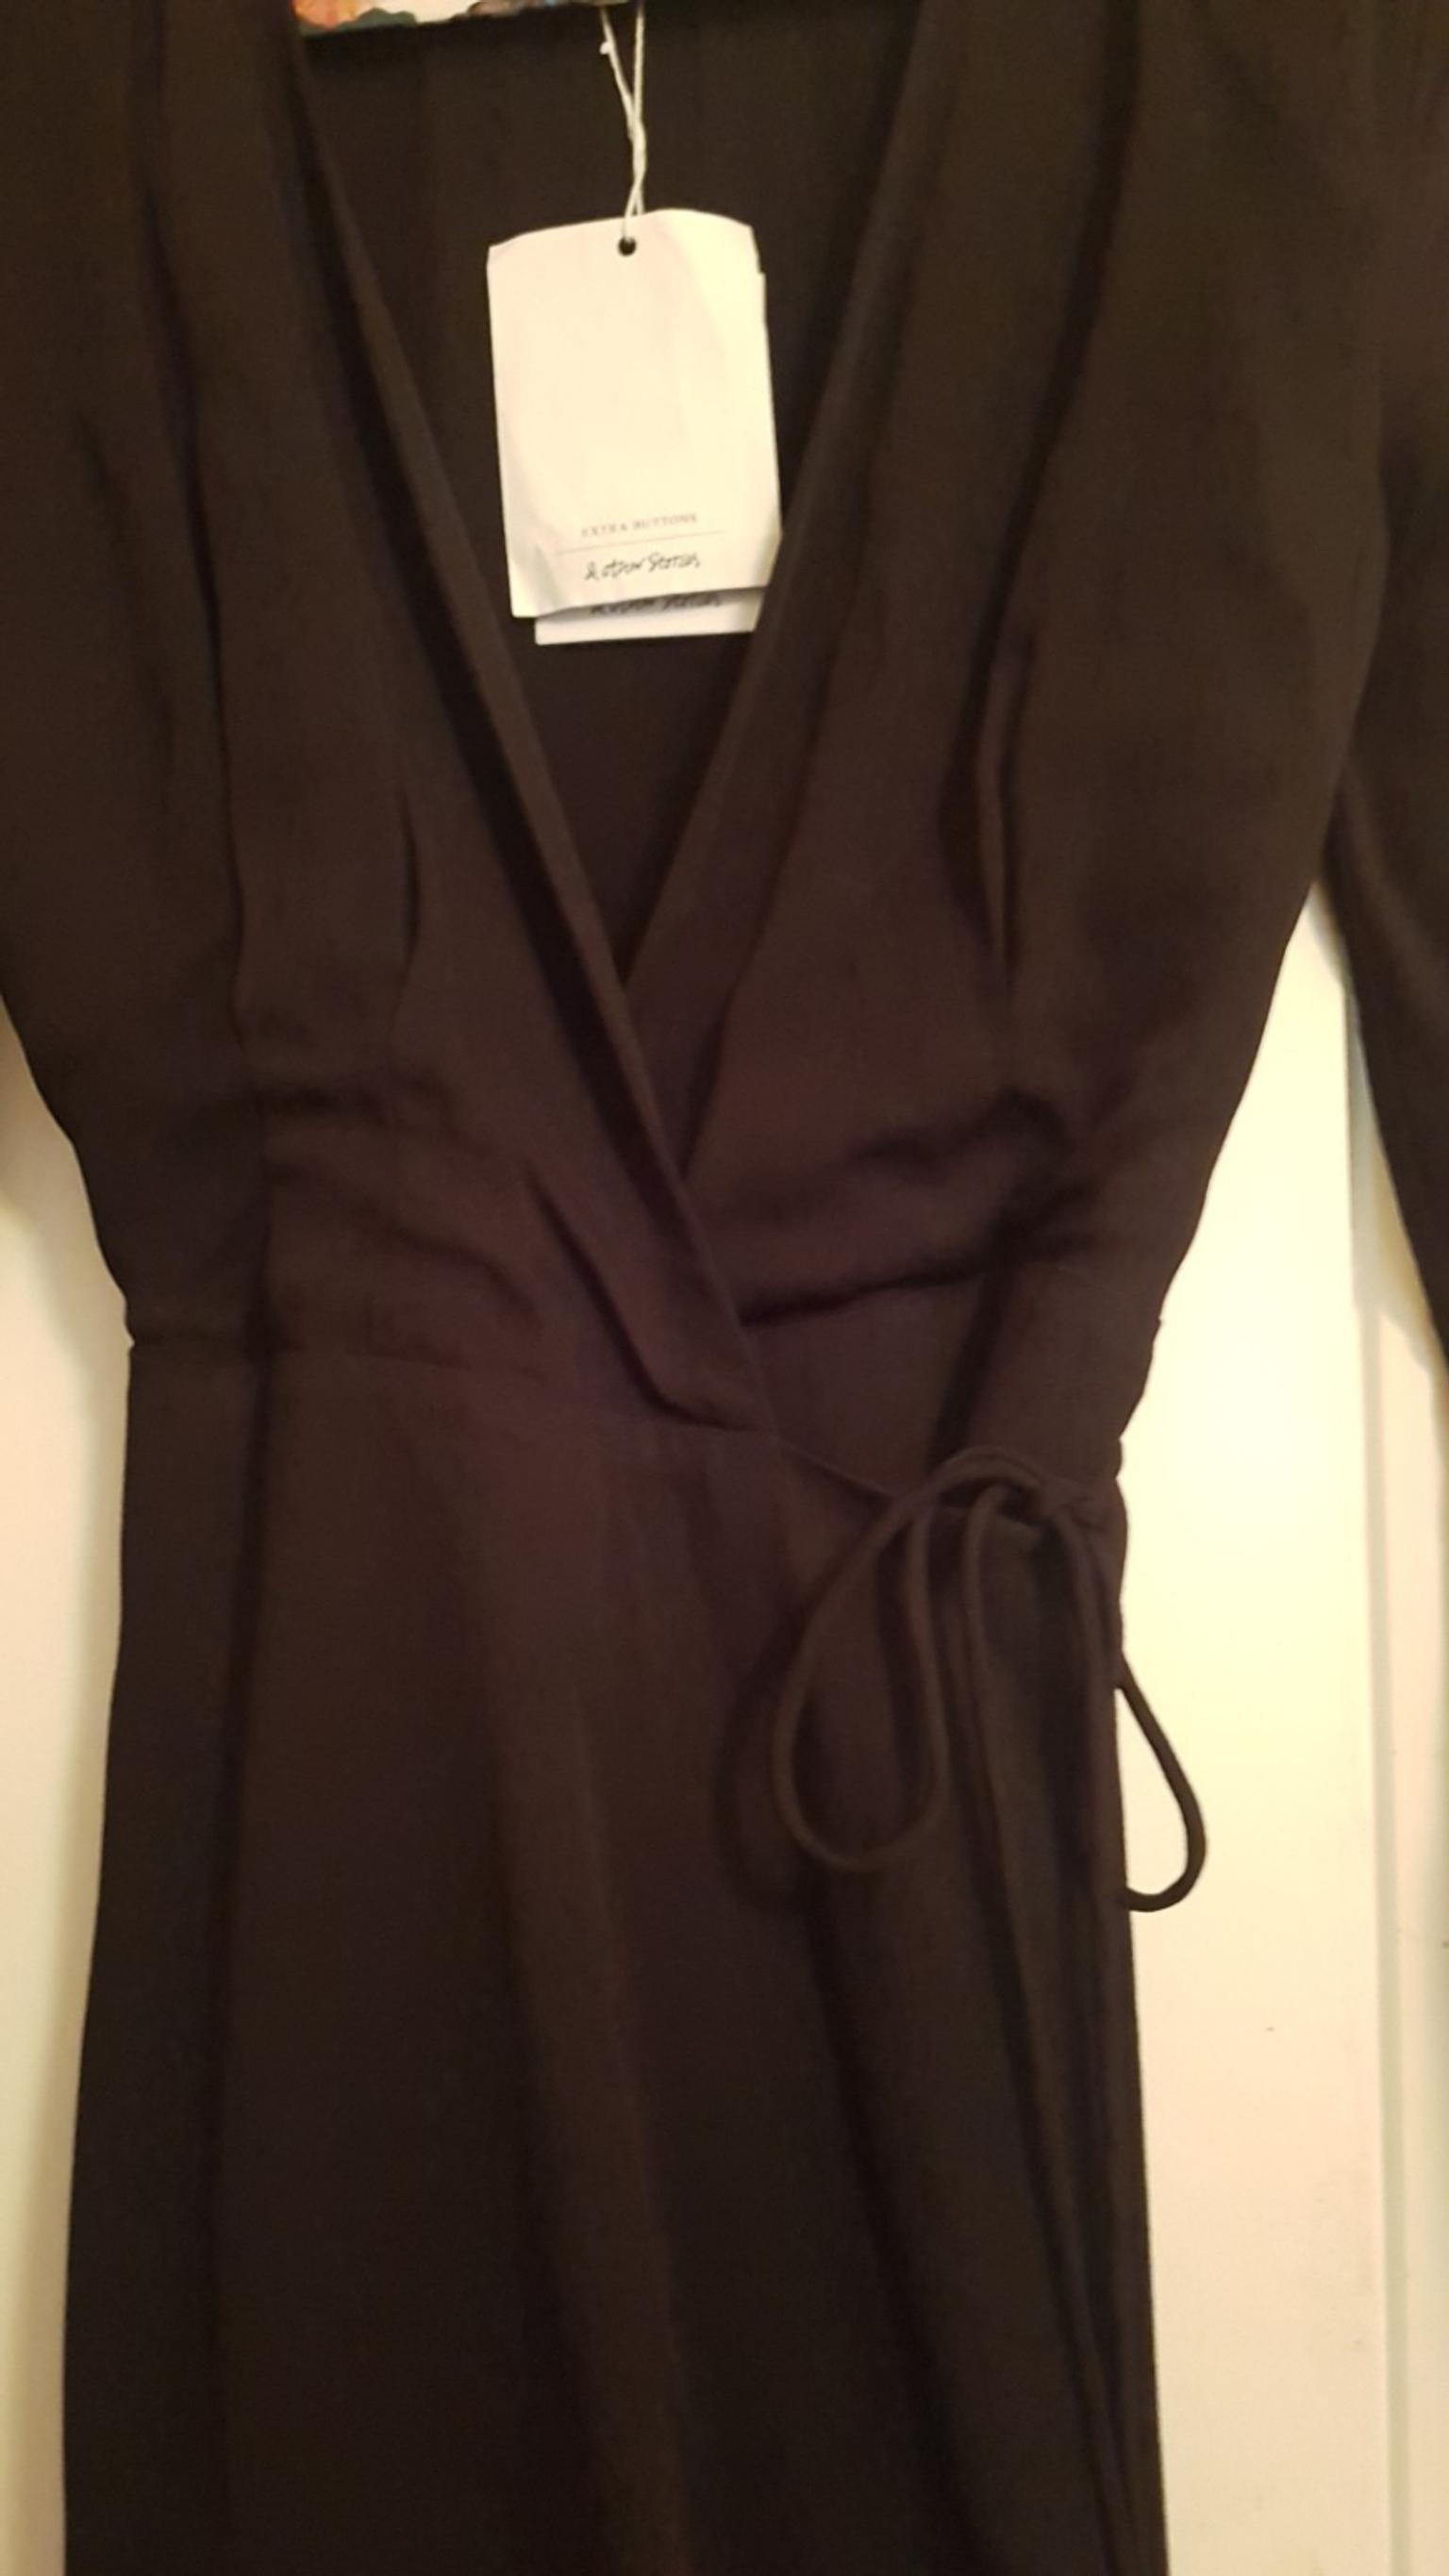 Other Stories wrap dress BNWT RRP£59 in ...